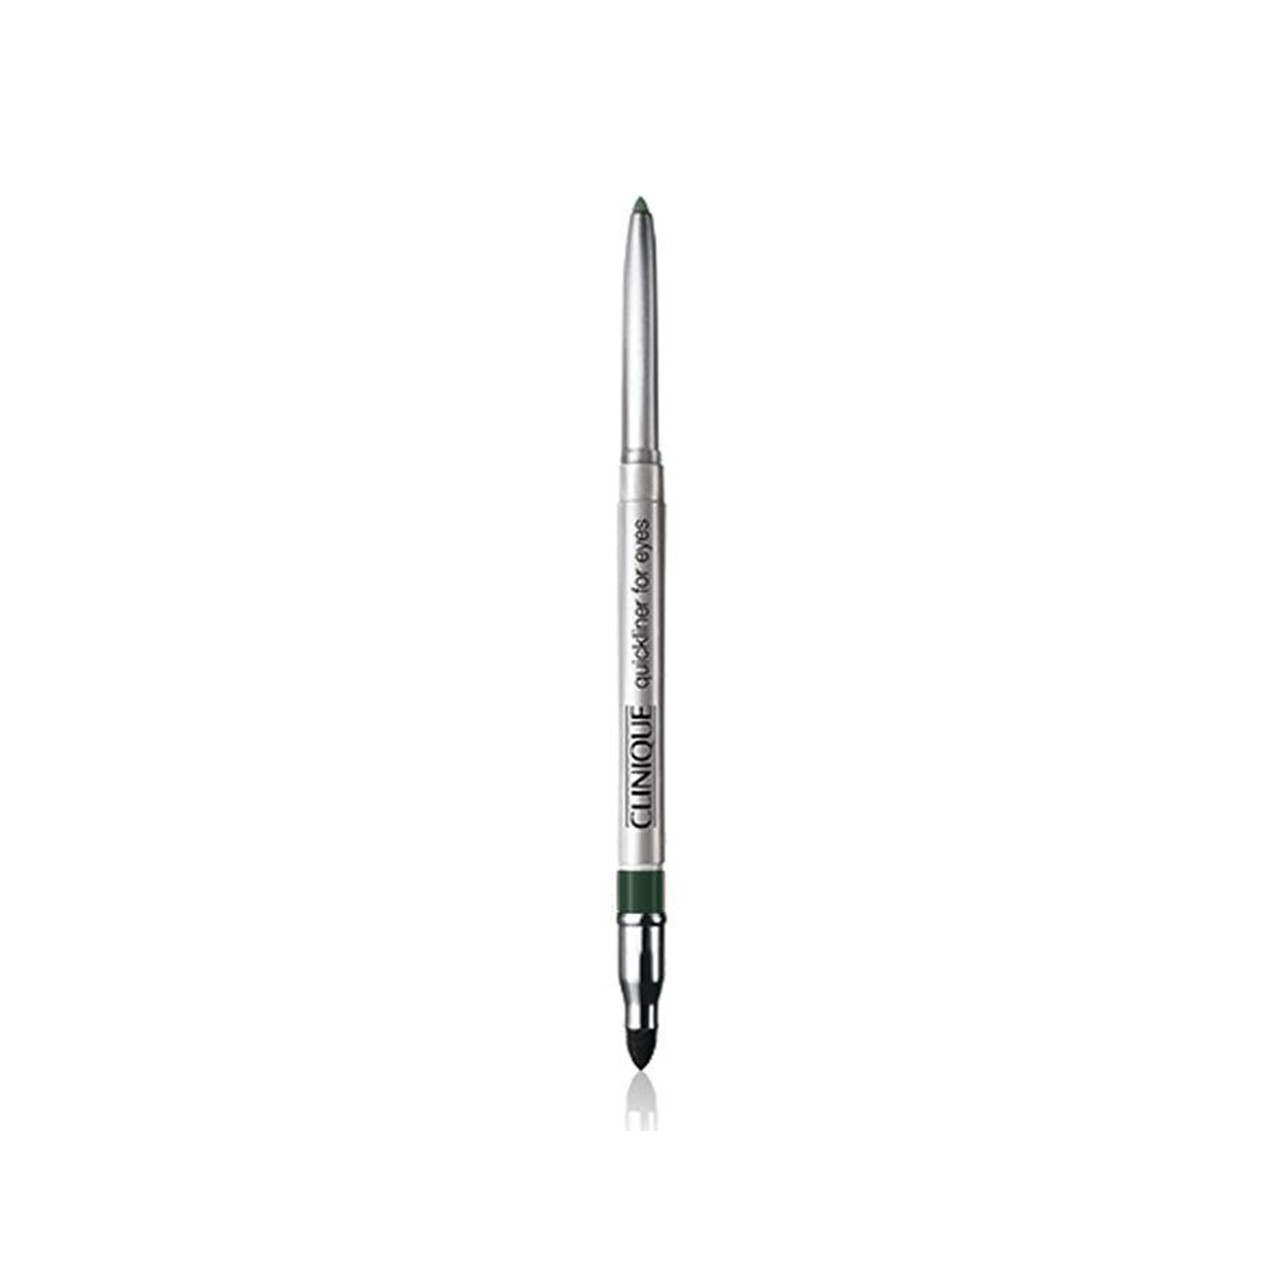 Clinique Quickliner For Eyes Moss 0.3g (0.01oz)